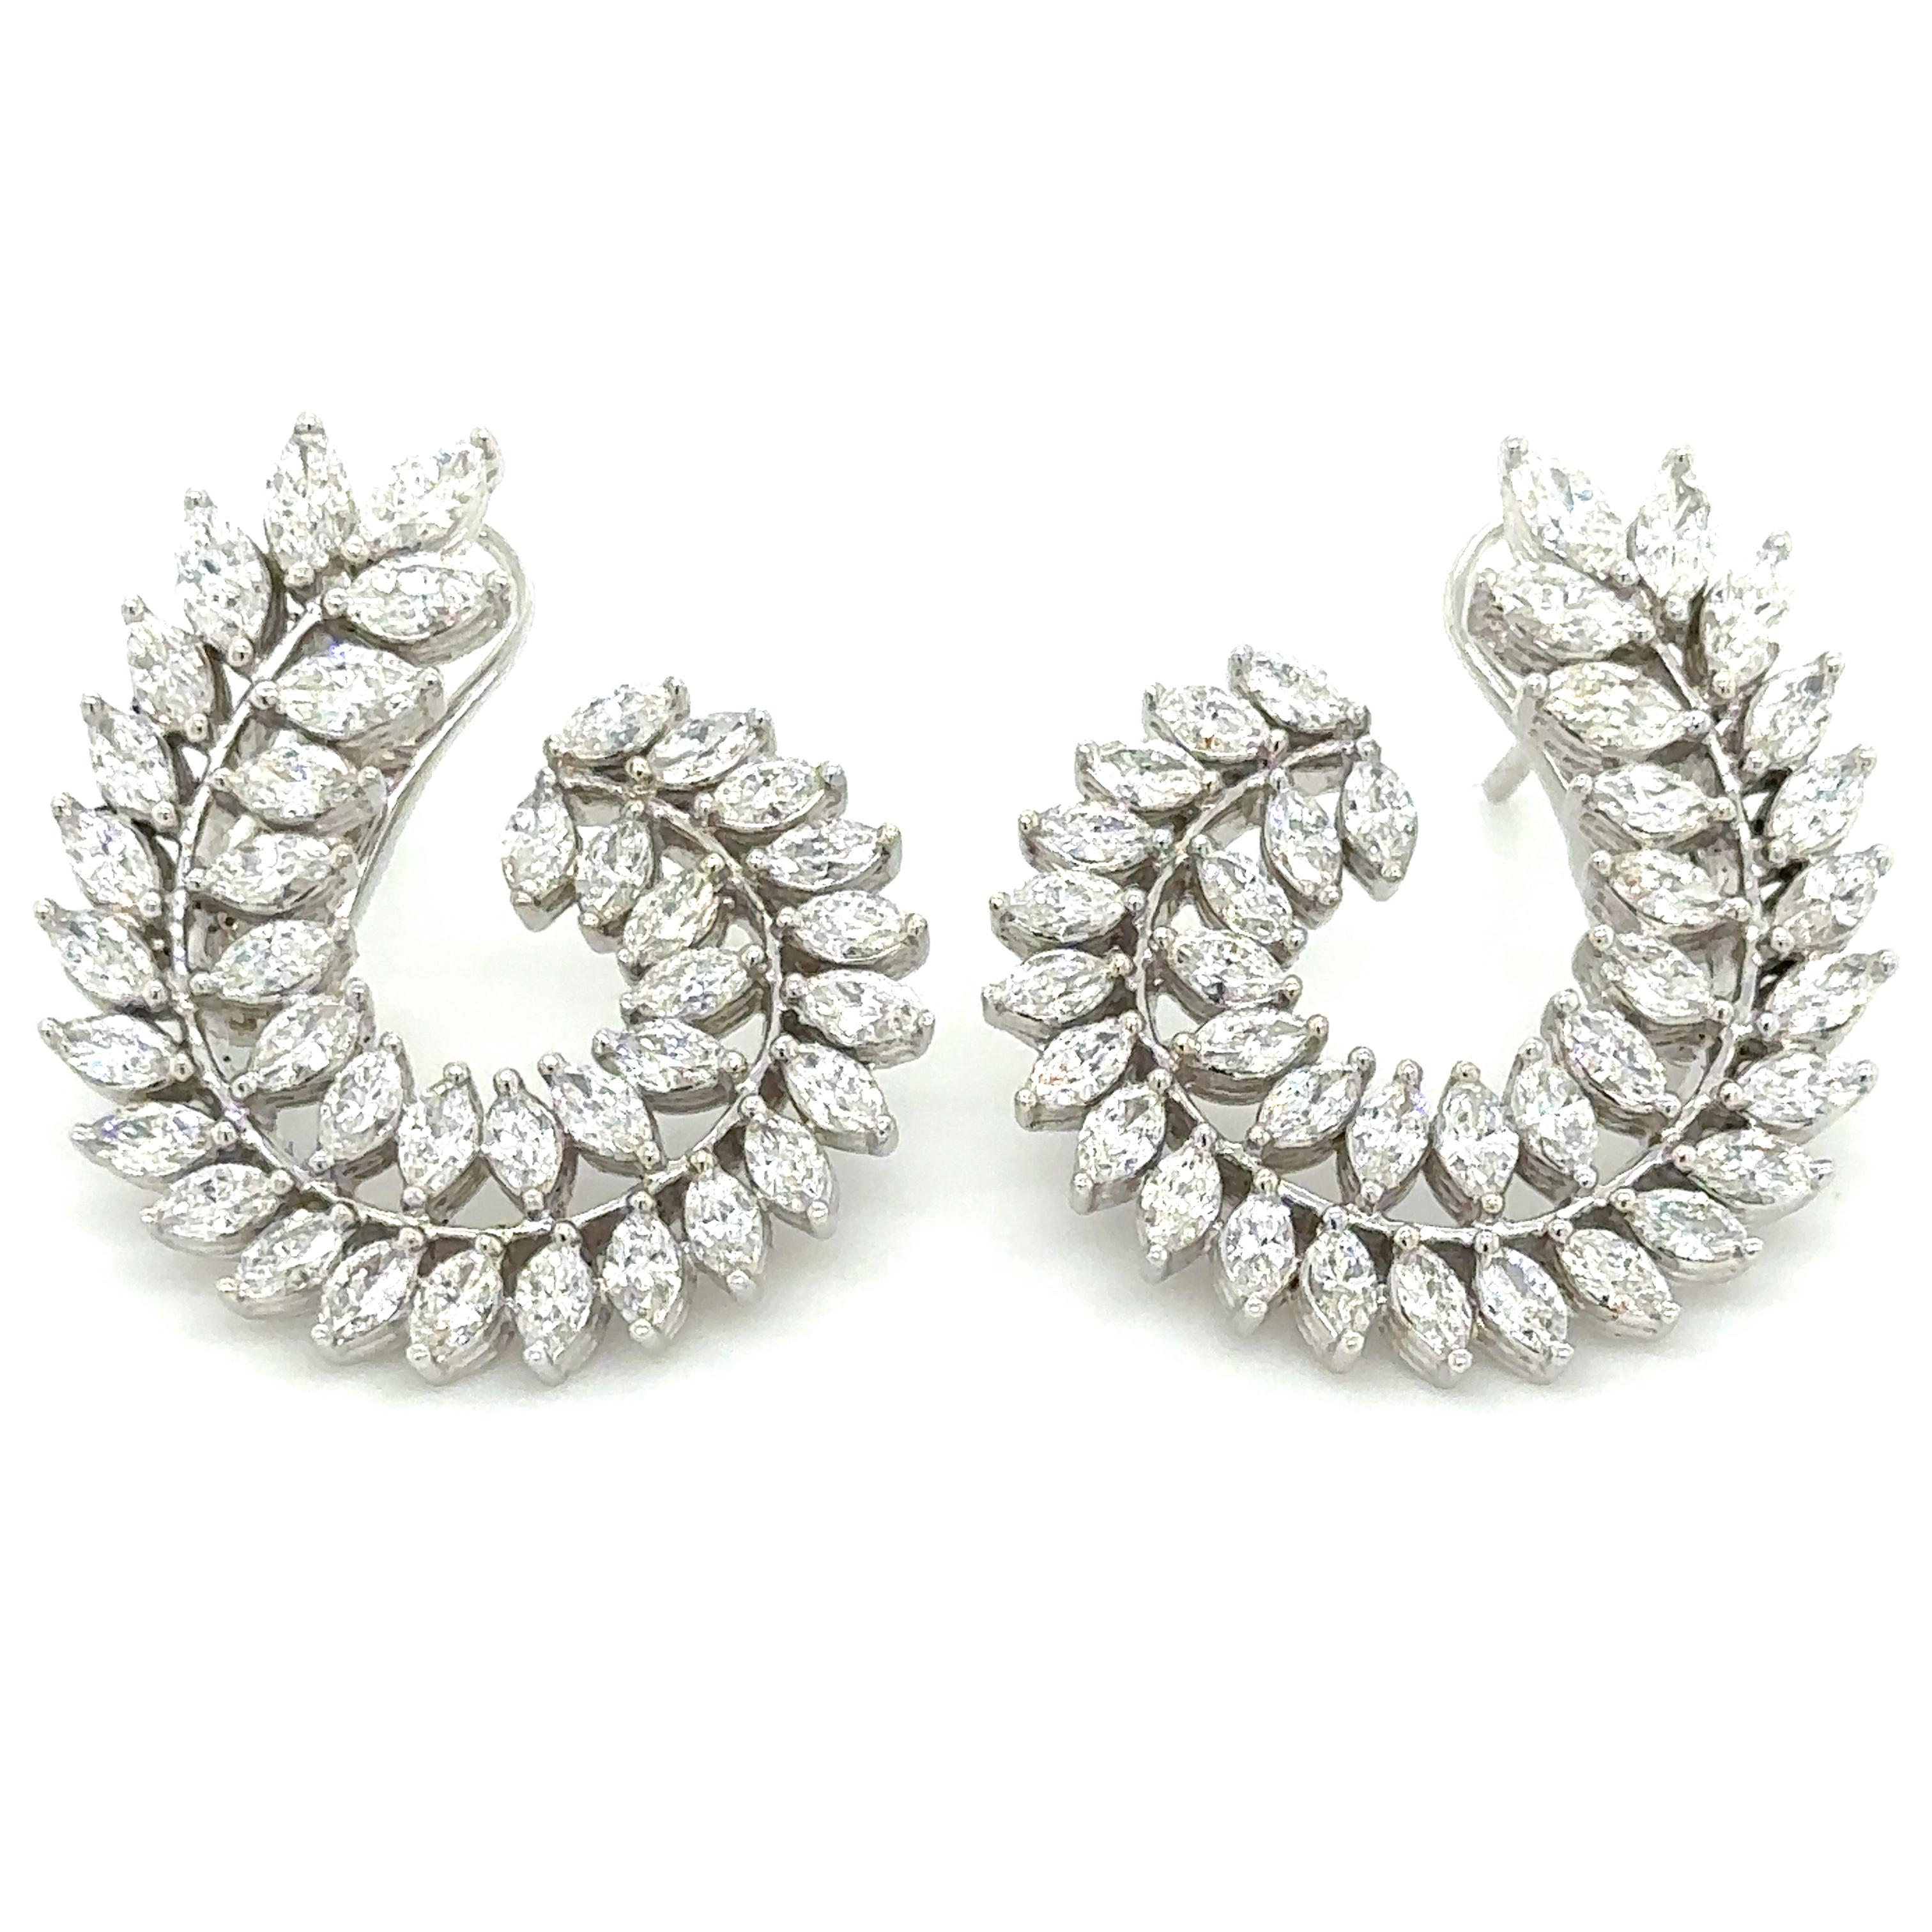 Adorn yourself lavishly with these exquisite statement earrings, crafted with 3.66carat total weight of striking marquise cut diamonds. Indulge in their magnetic shimmer and regal design to elevate any look and occasion into a truly luxurious